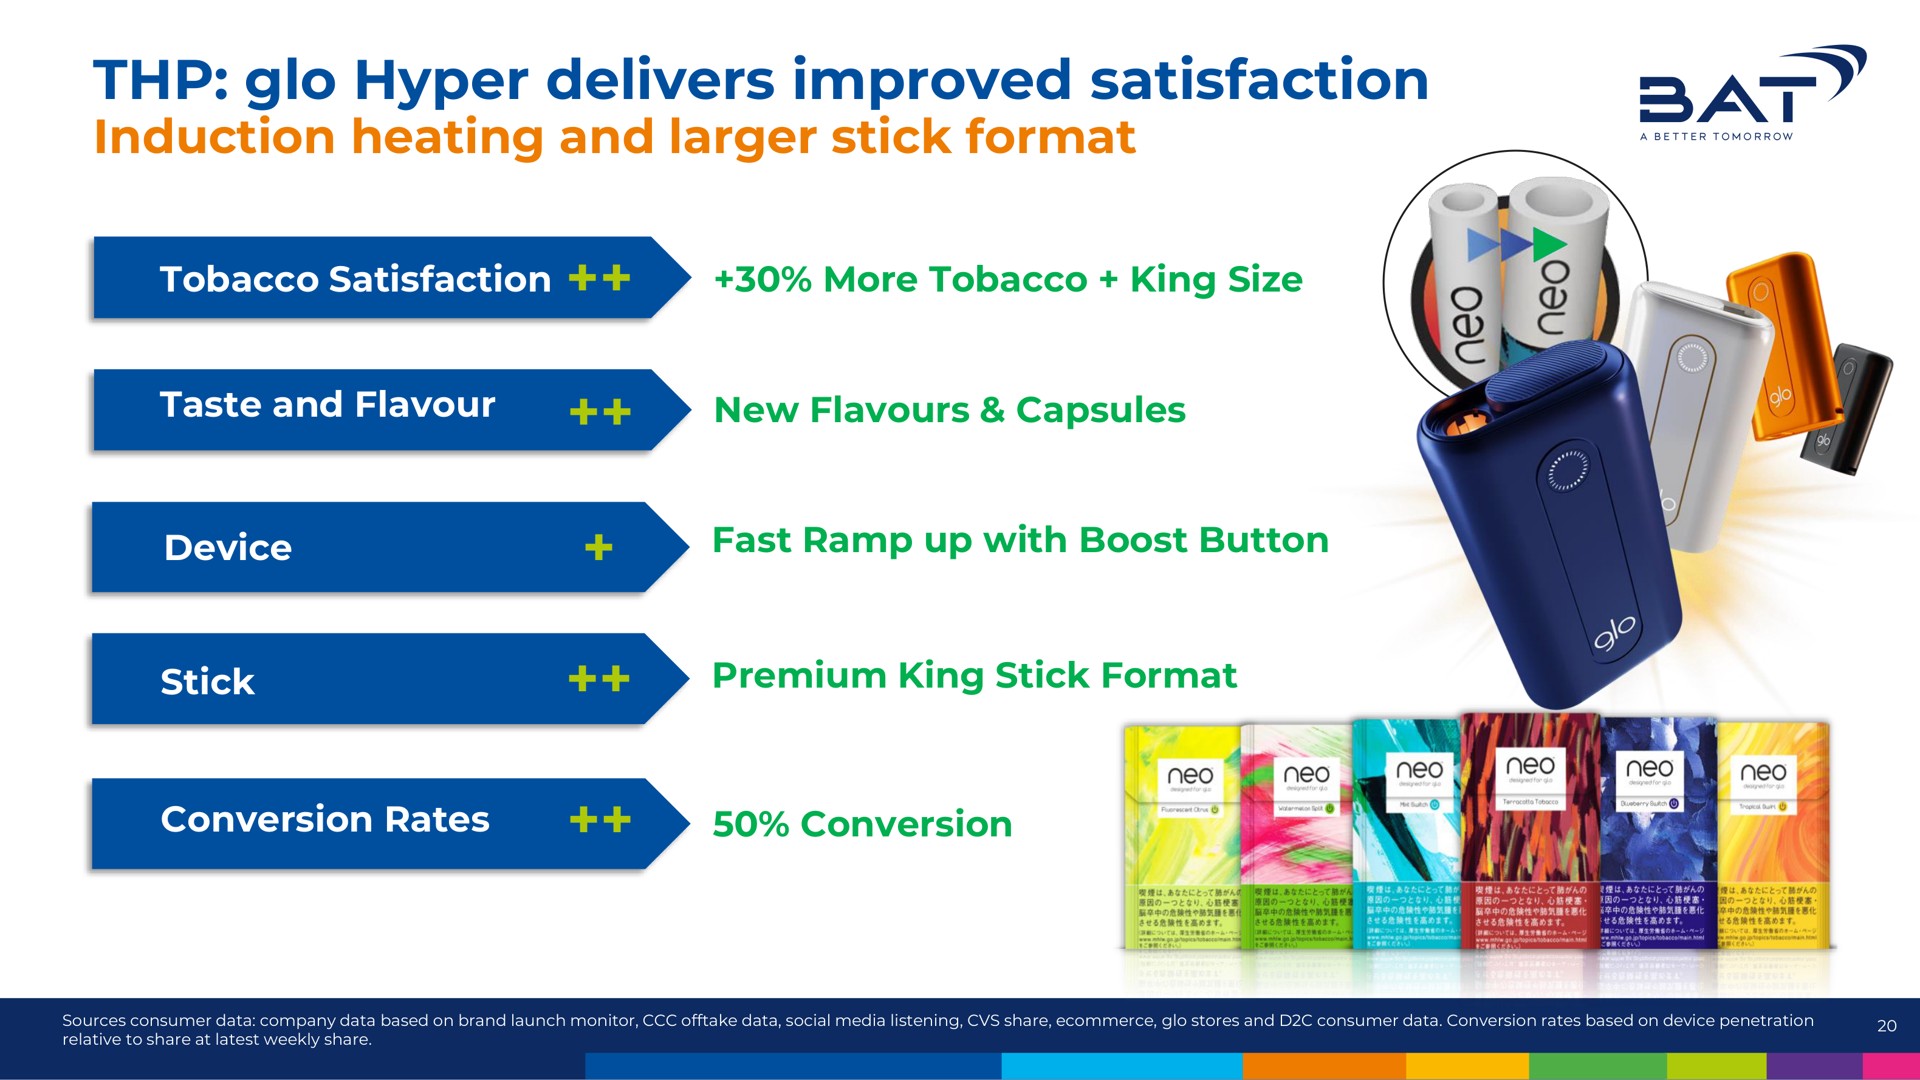 hyper delivers improved satisfaction induction heating and stick format at | BAT